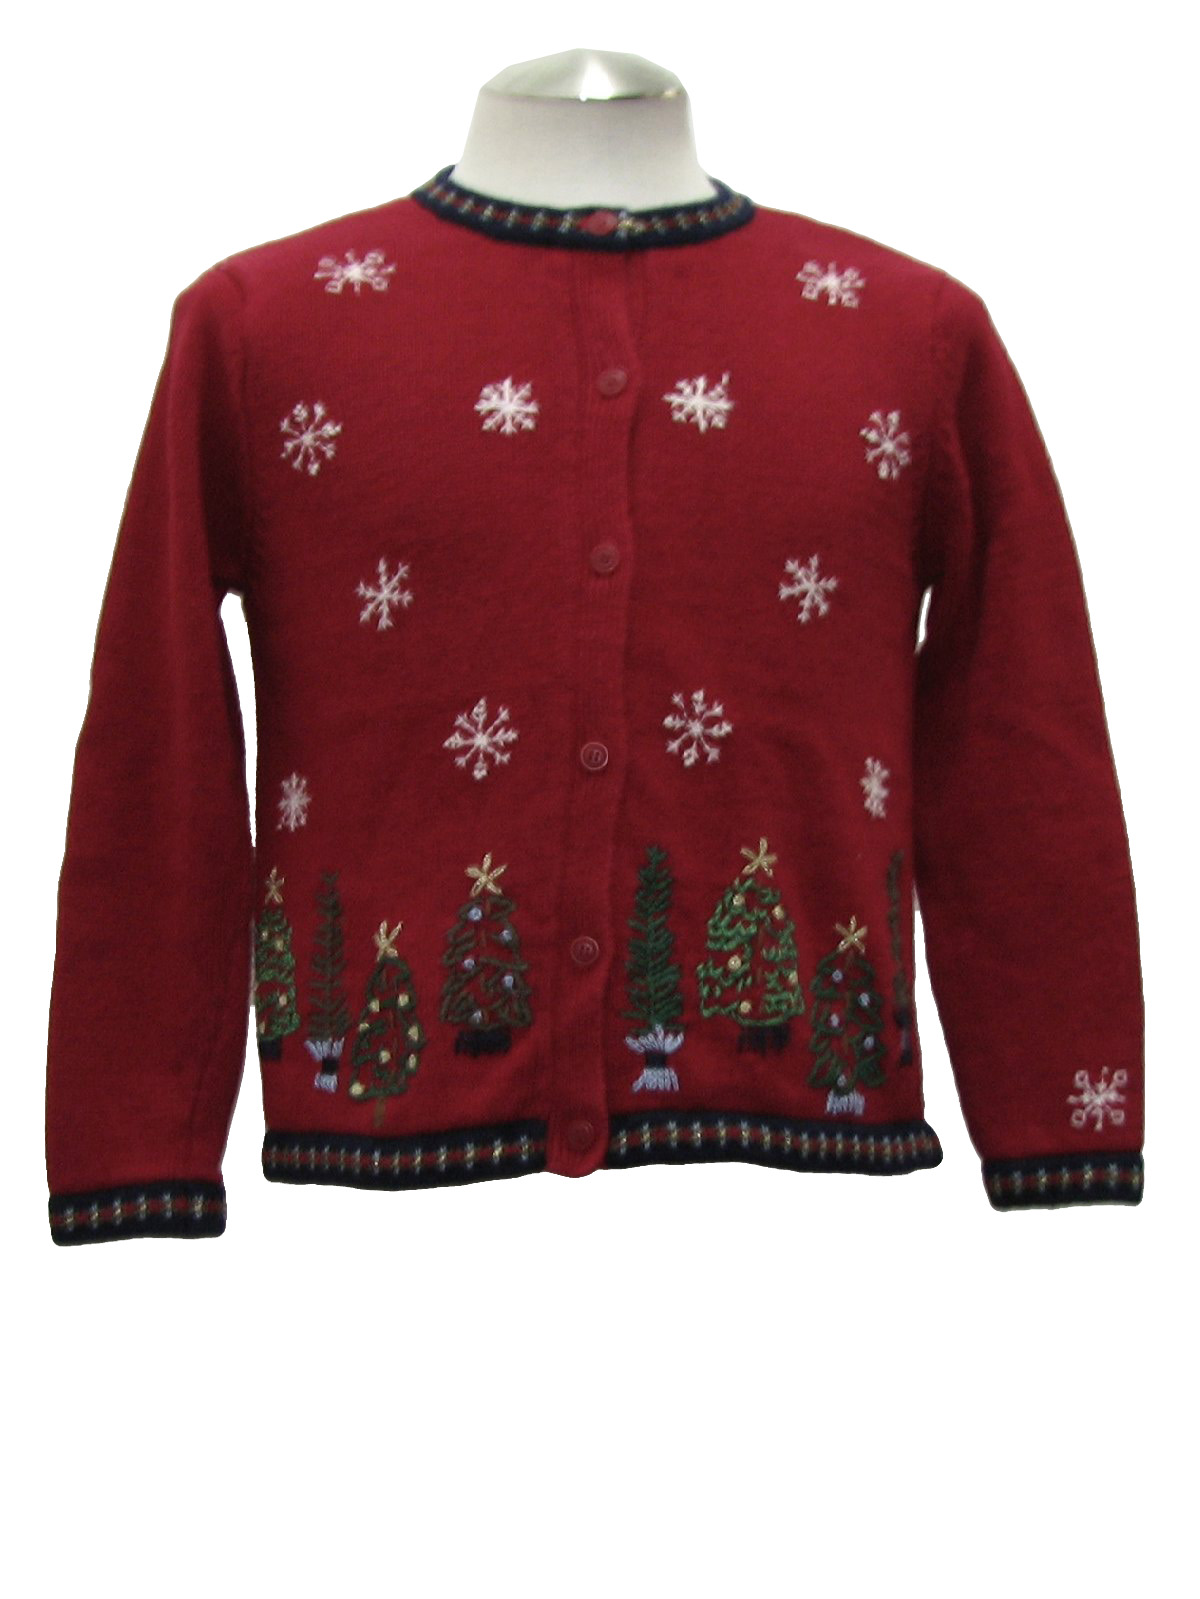 Womens Ugly Christmas Sweater: -Northern Reflections- Womens red ...